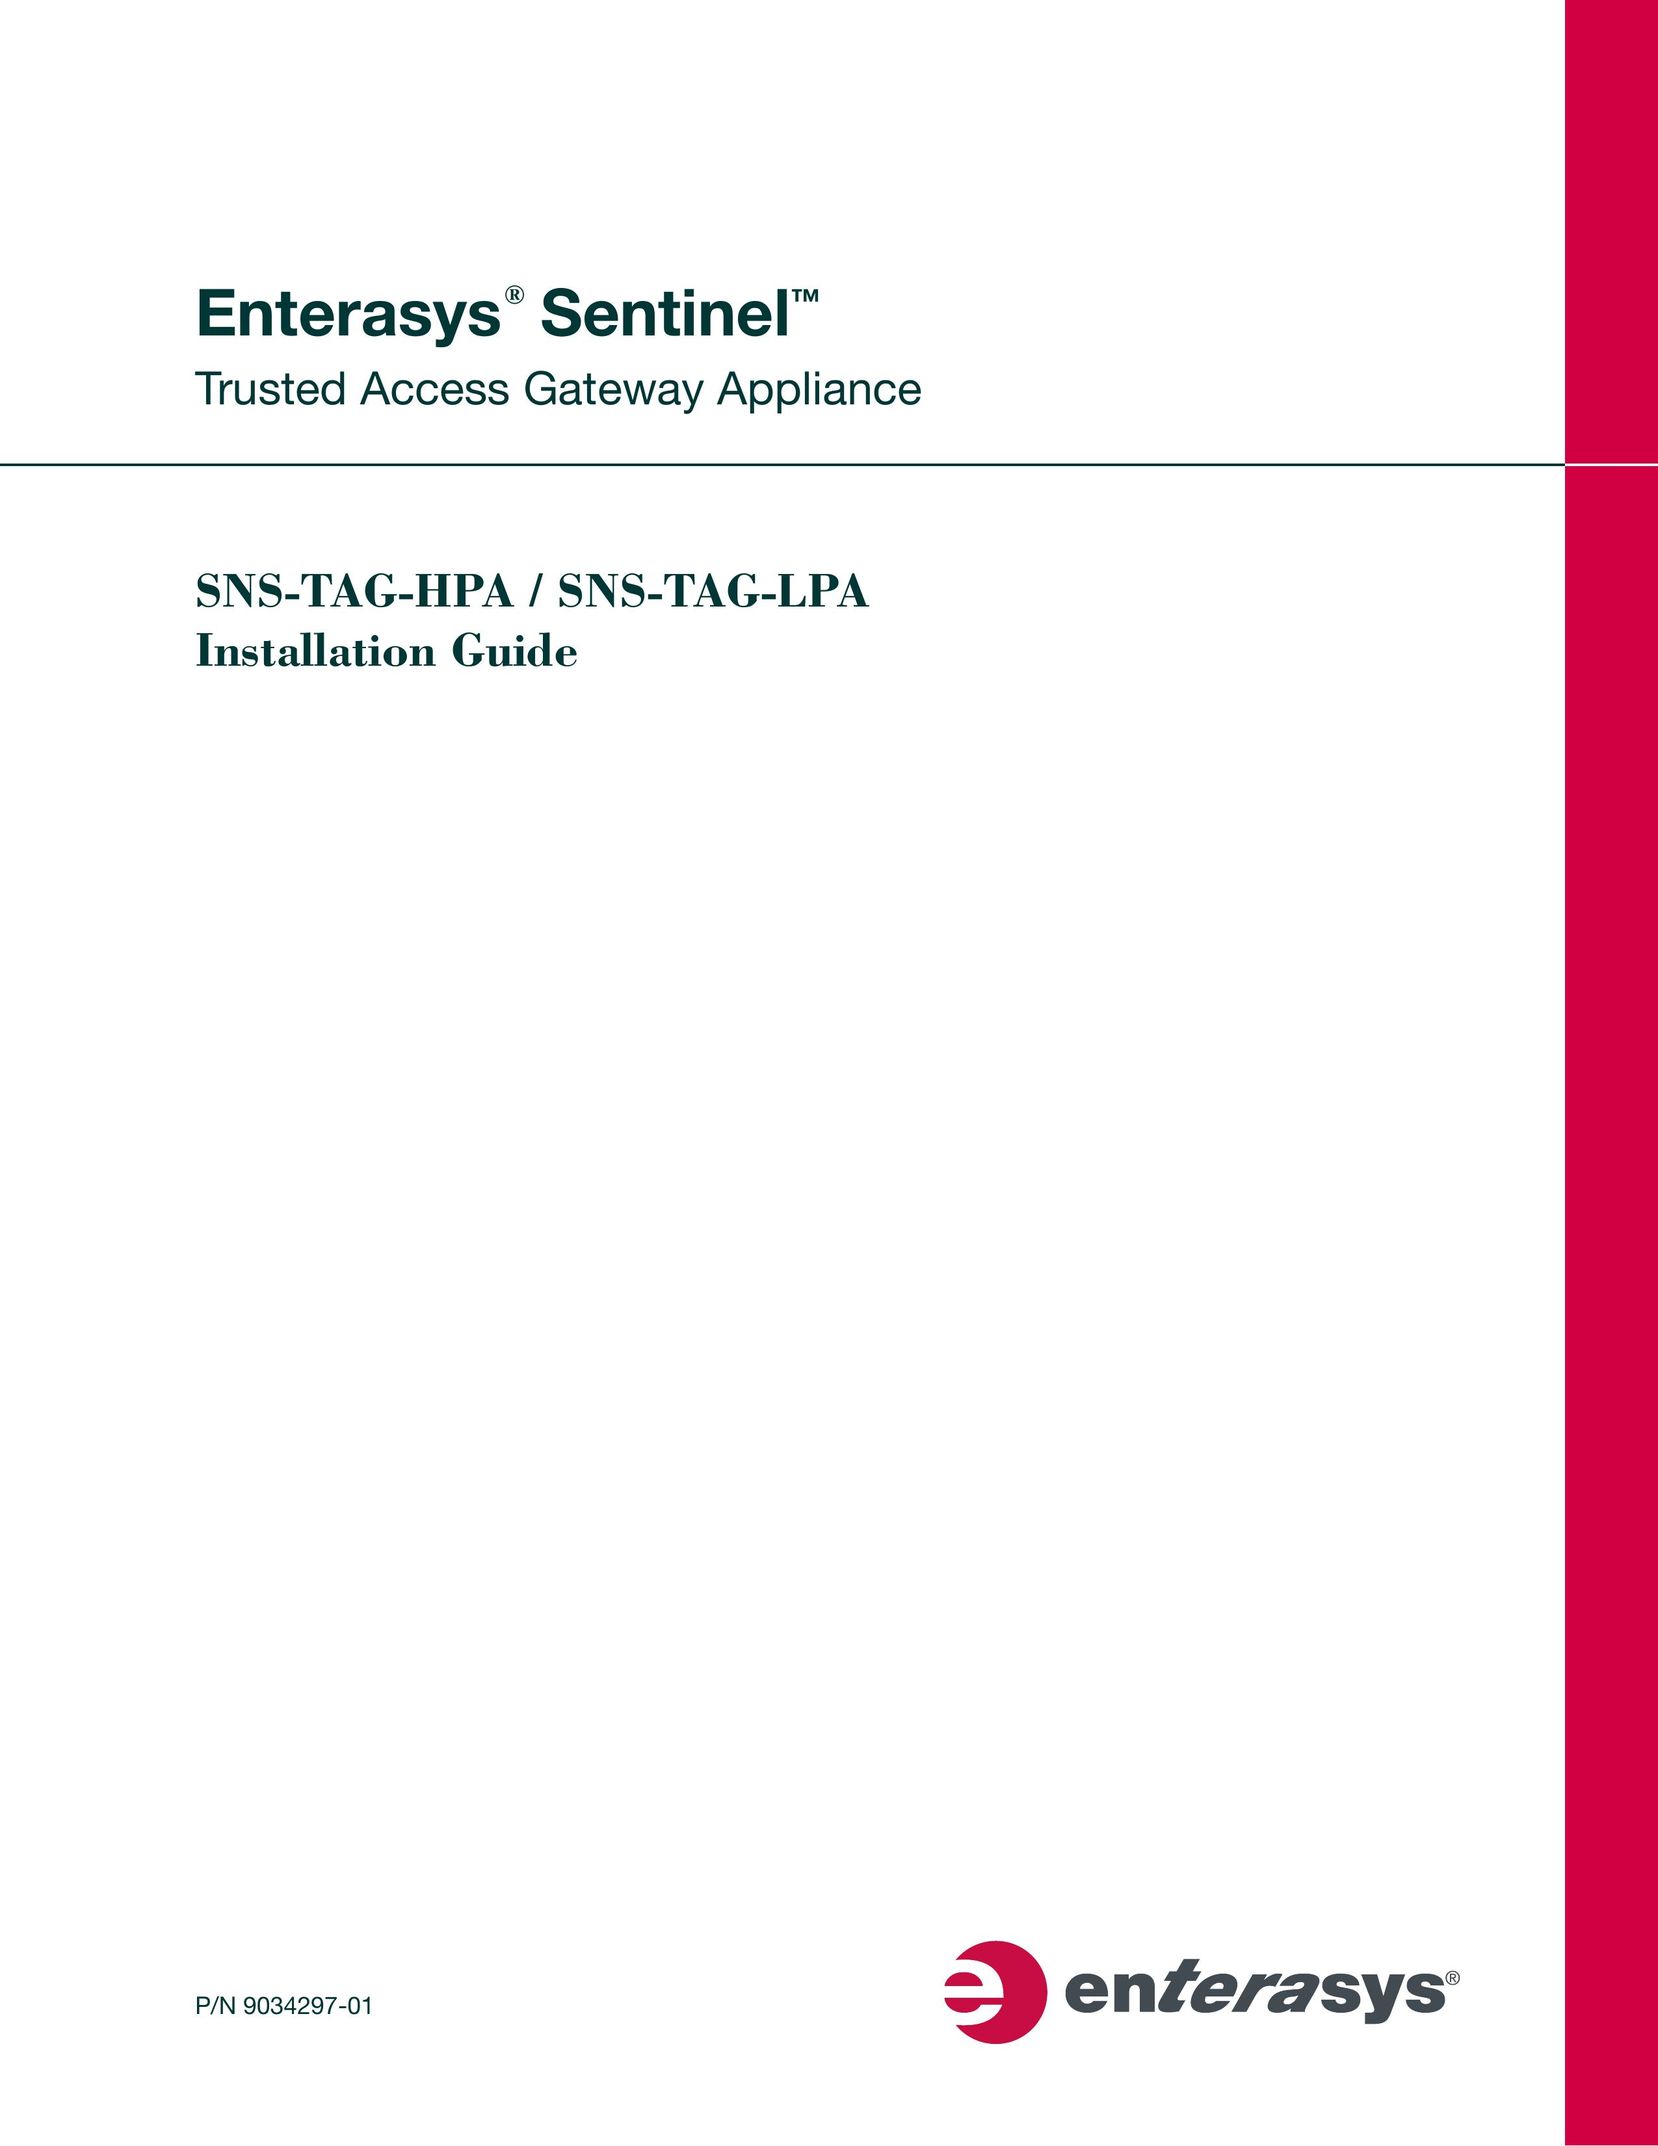 Enterasys Networks SNS-TAG-HPA Network Hardware User Manual